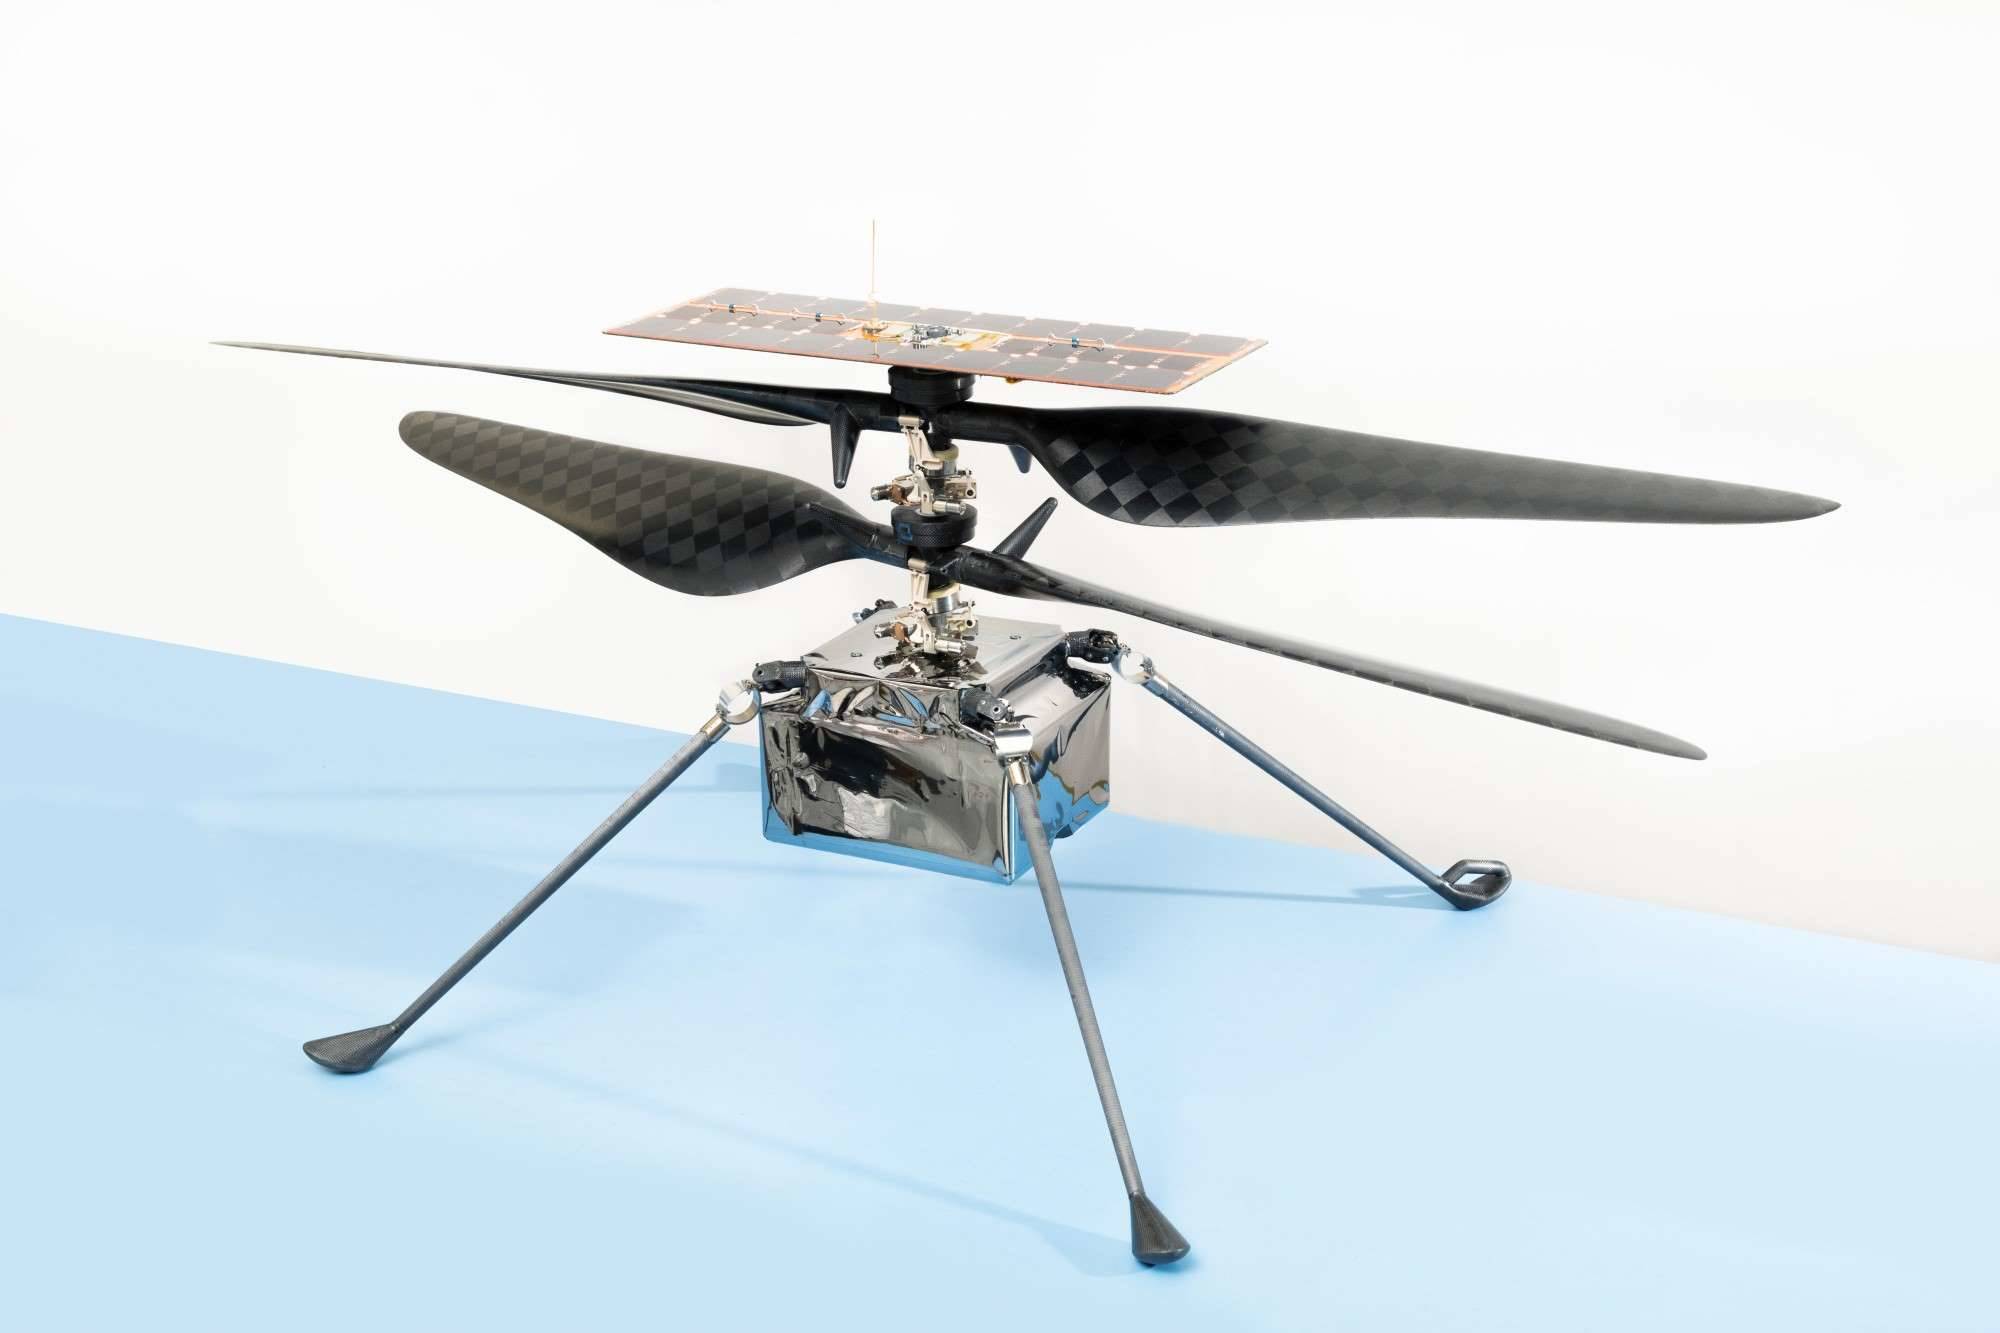 NASA’s Ingenuity helicopter arrived on Mars attached to the underbelly of the Perseverance rover in mid-February. It has been deployed and is charging batteries and performing testing ahead of its maiden flight. 
Jet Propulsion Laboratory photo